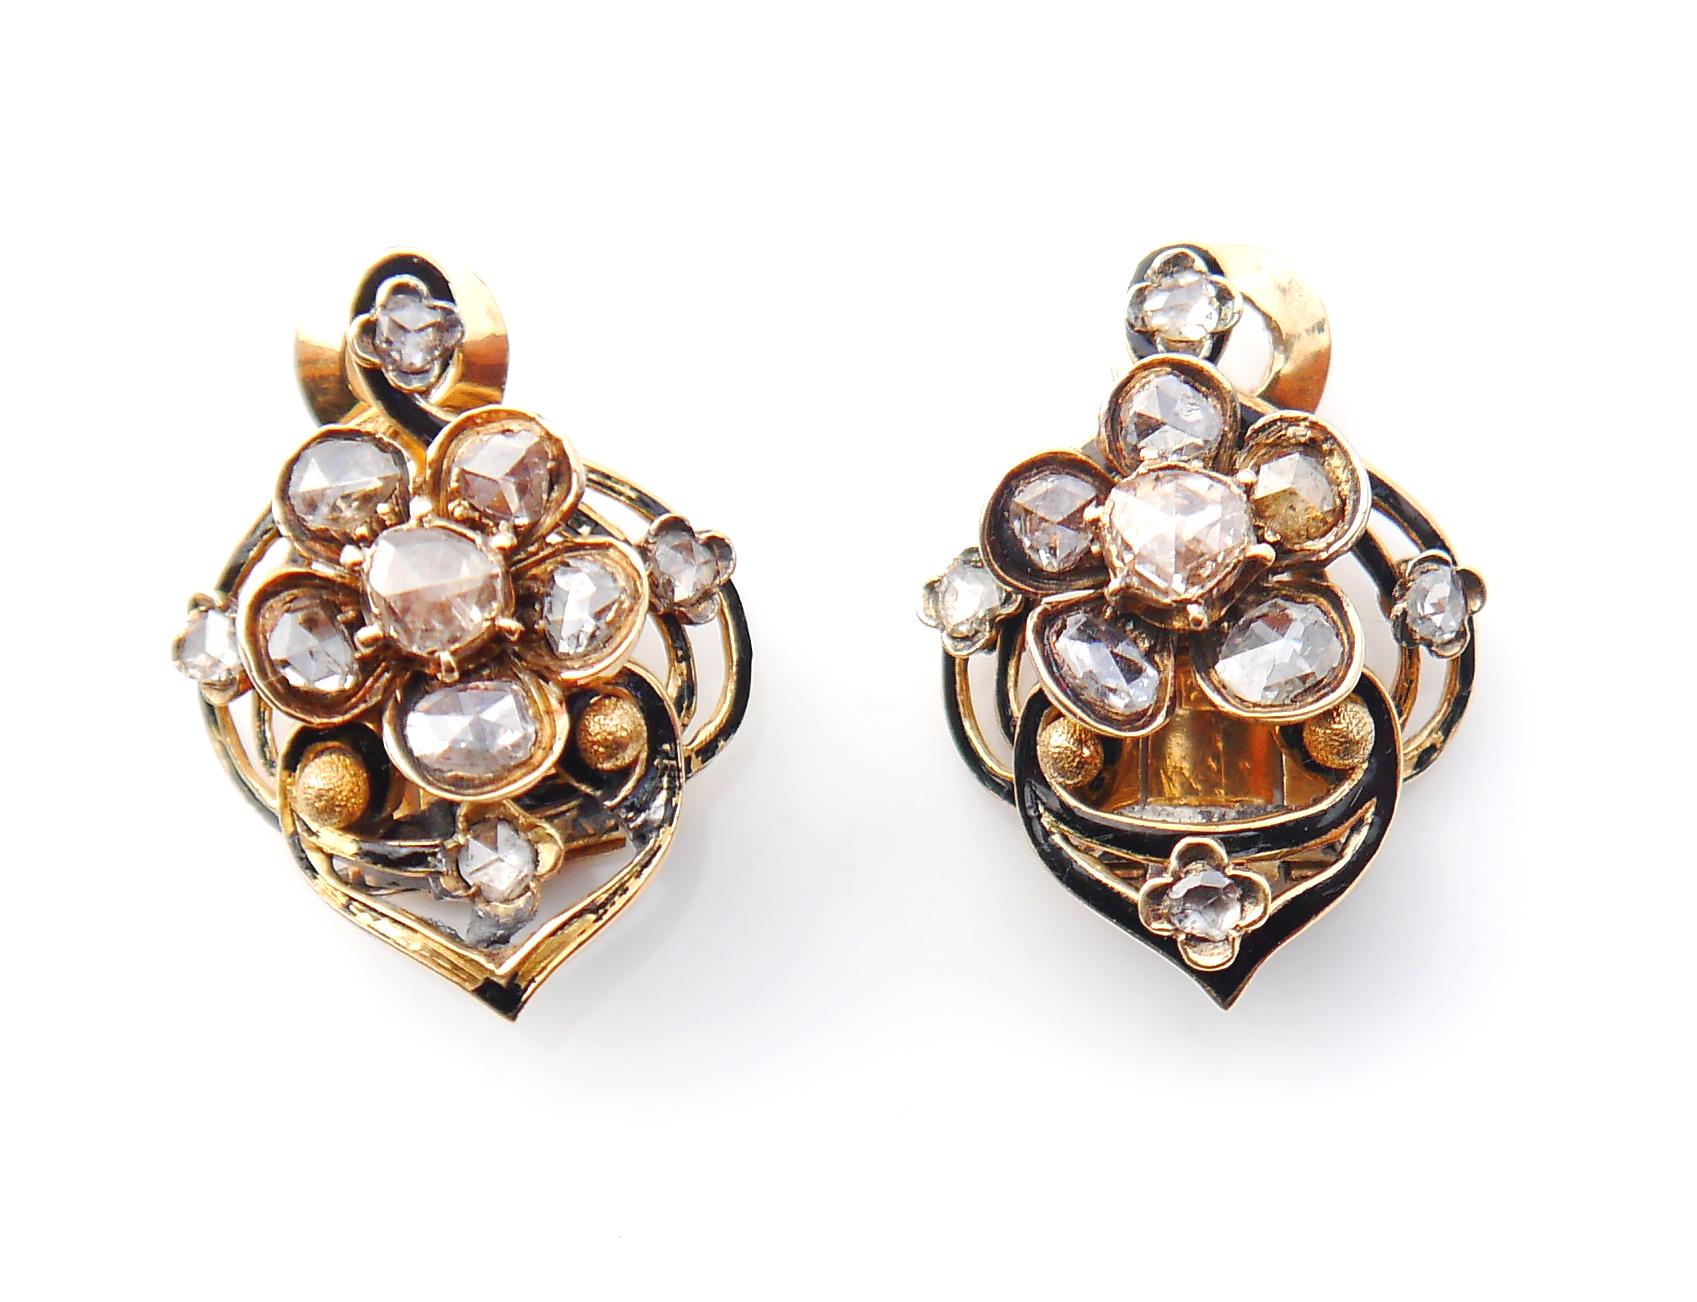 A pair of Vintage Egyptian handmade Diamond Huggies or Clips in 18 Yellow Gold. Openwork shields with flowers connected, with borders in Black Enamel. One diamond flower can be rotated around.

Folding locks. Egyptian hallmarks for 18K. Circa 1920 -